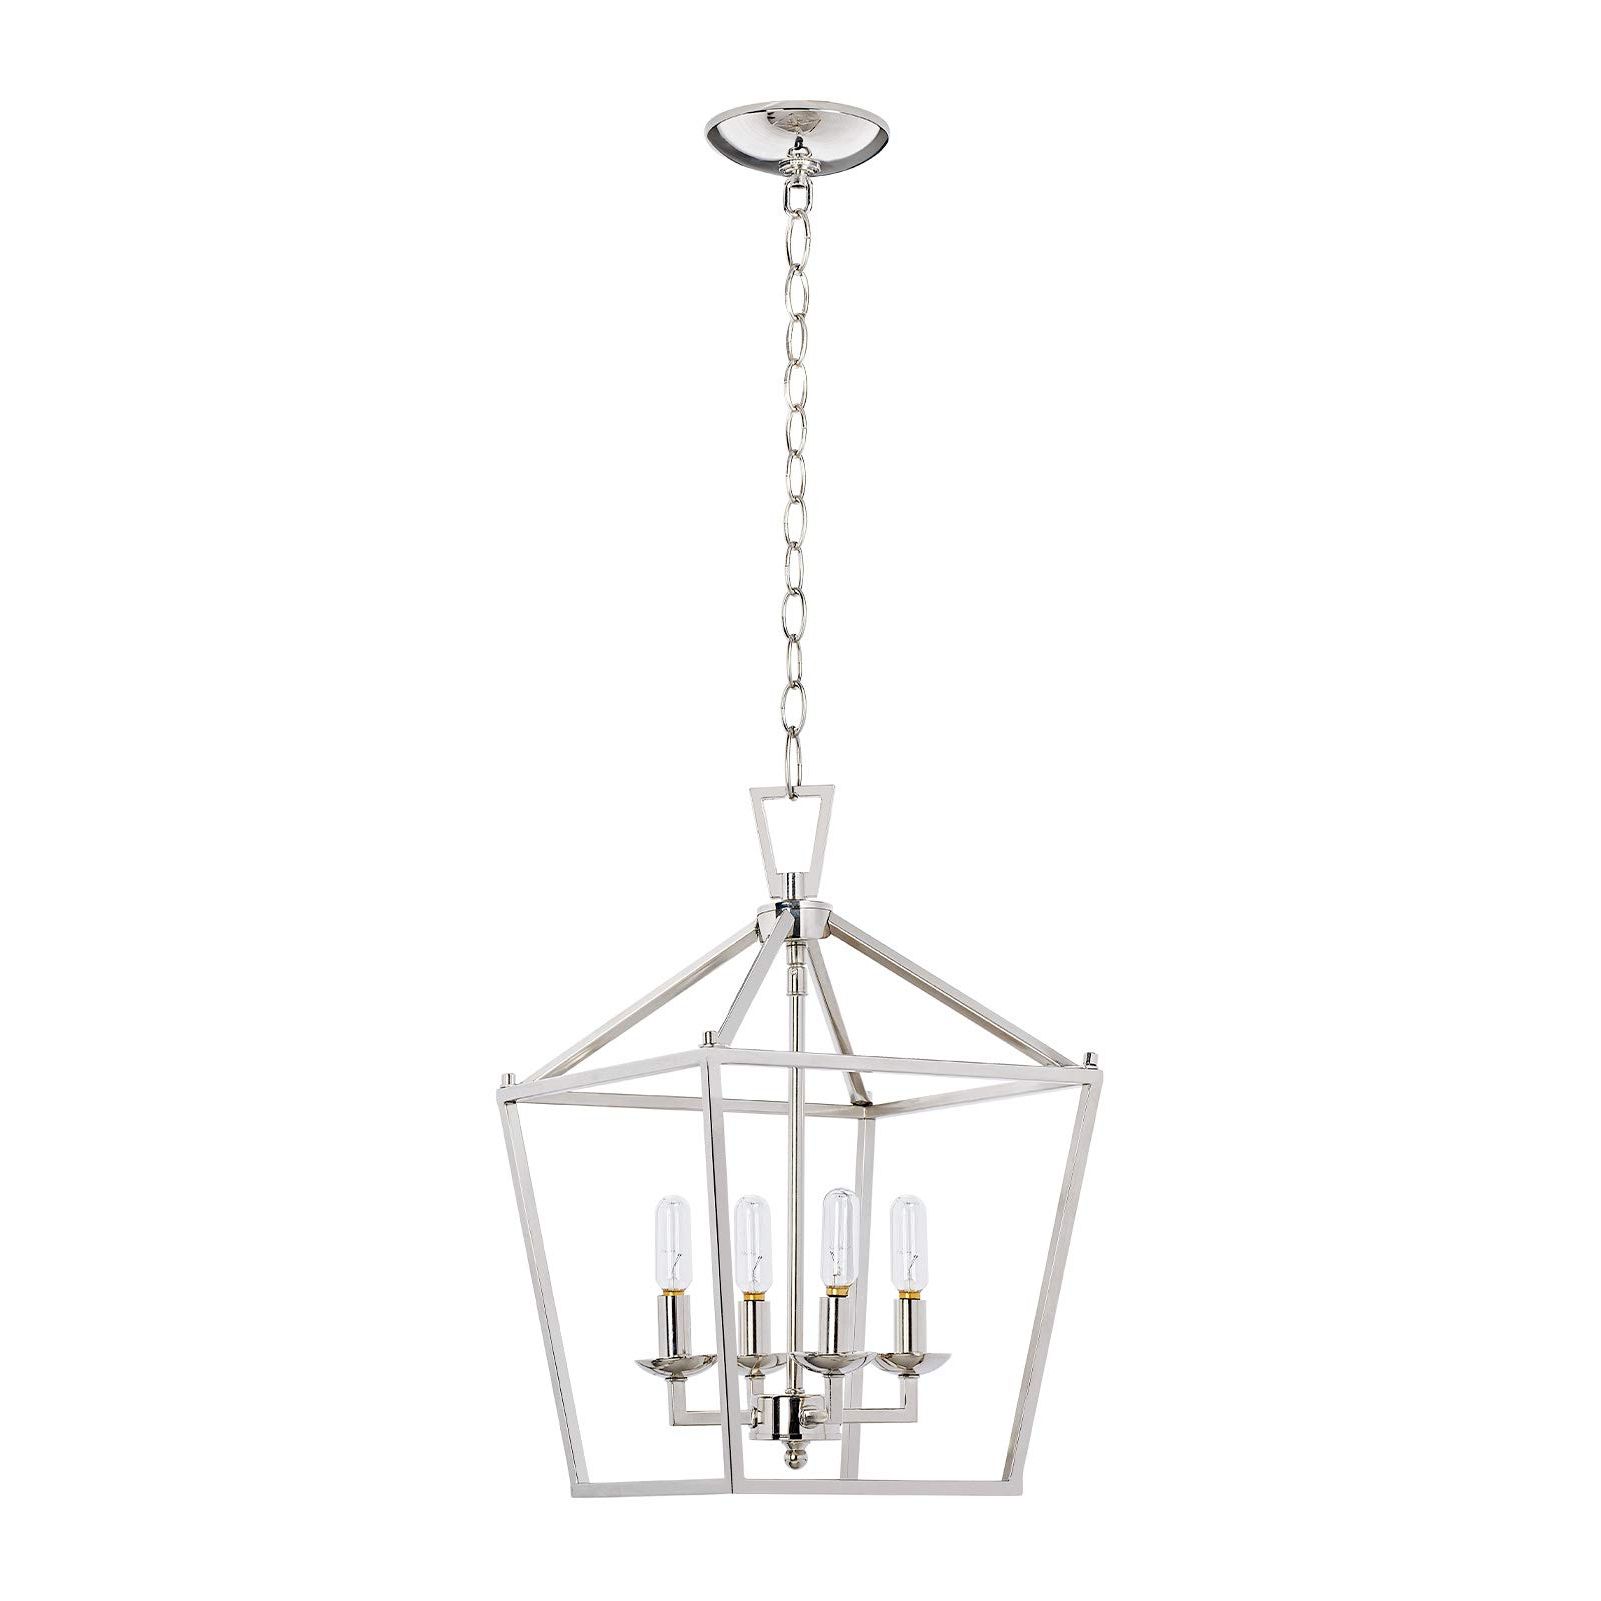 Trendy Polished Nickel Lantern Chandeliers In Motini 4 Light Silver Lantern Pendant Light Polished Nickel Finish Hanging  Light Fixture Geometric Chandelier With Adjustable Chain Metal Cage Pendant  Lighting For Kitchen Island Dining Room Foyer – – Amazon (View 15 of 15)